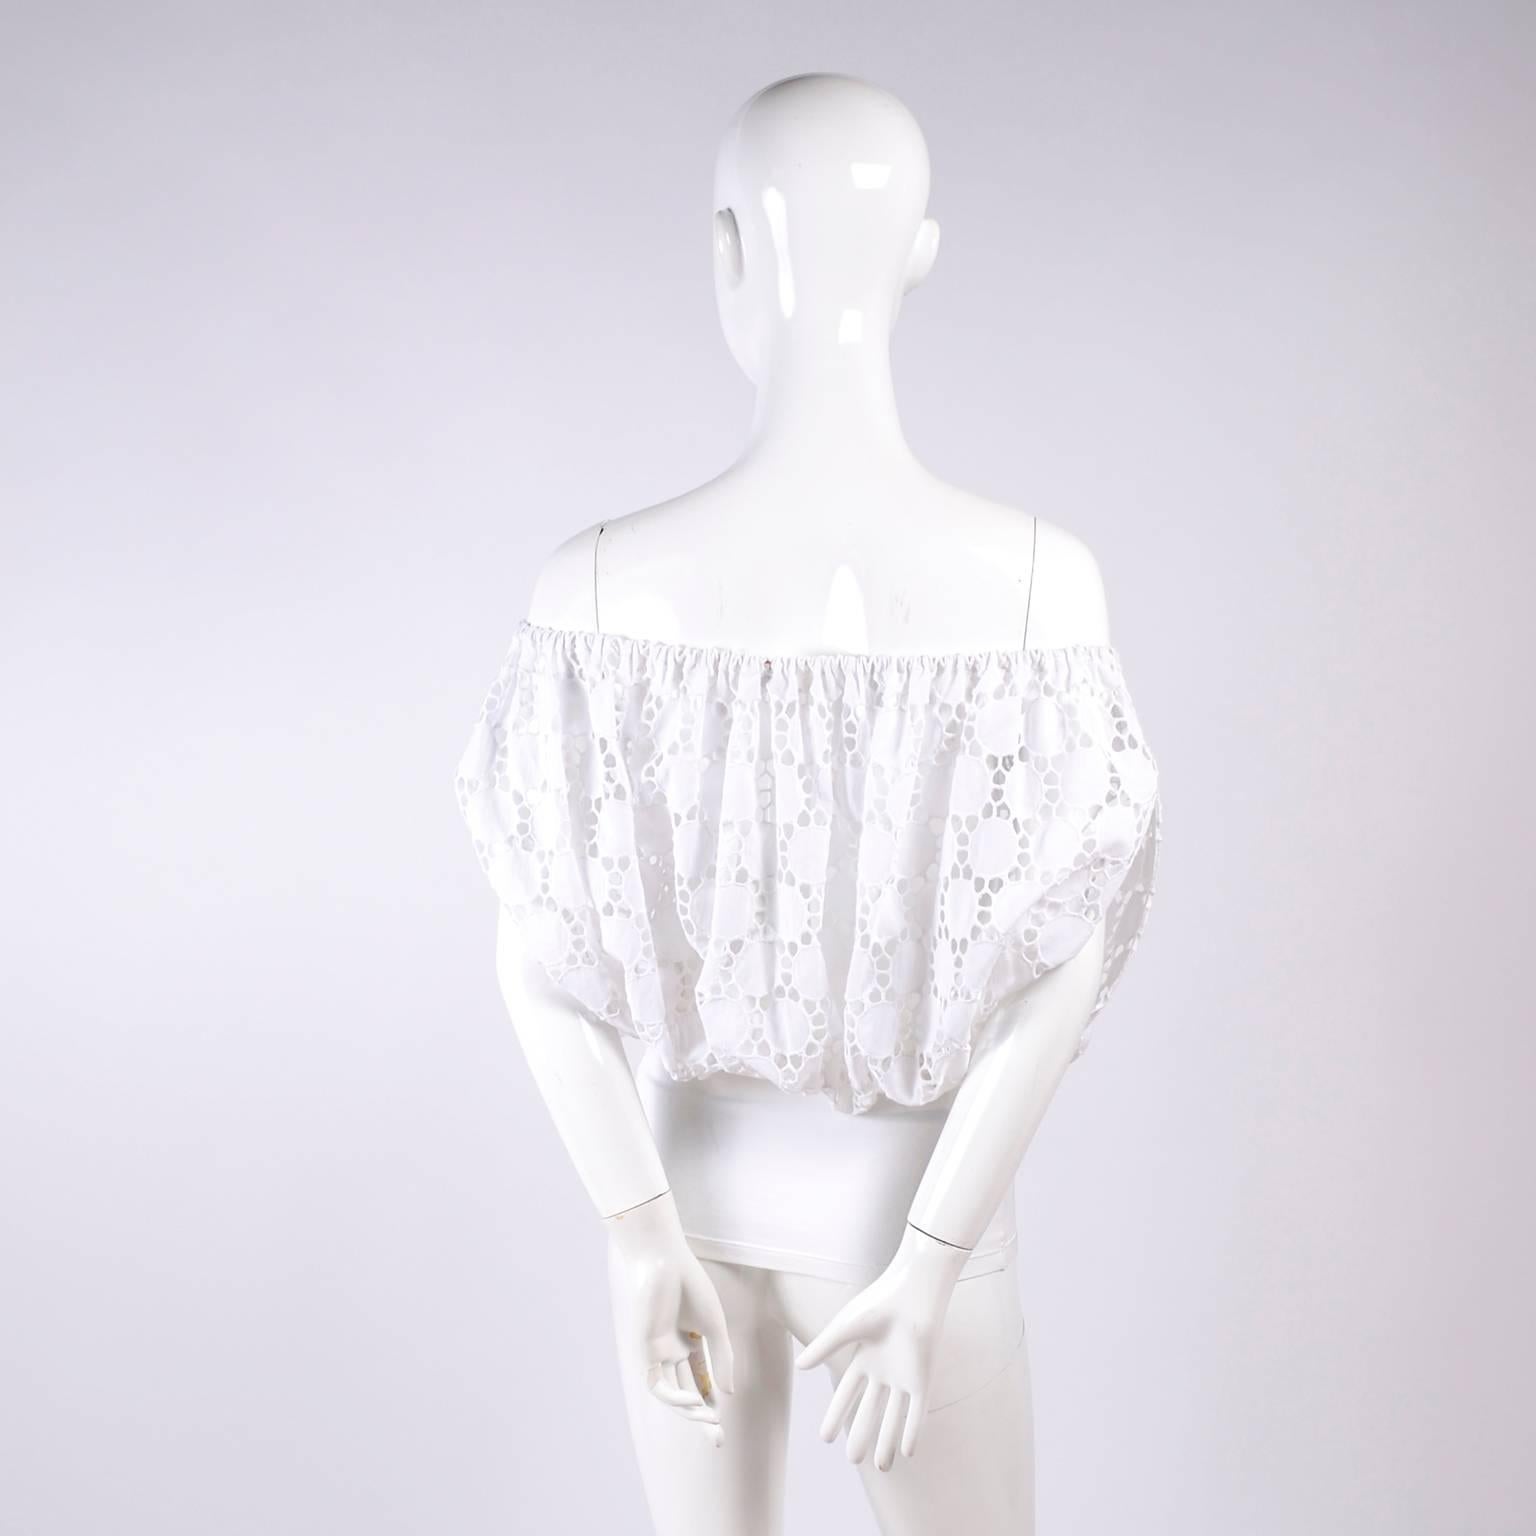 Off Shoulder Anne Fontaine White Eyelet Cotton Blouse Top New With Tags 1